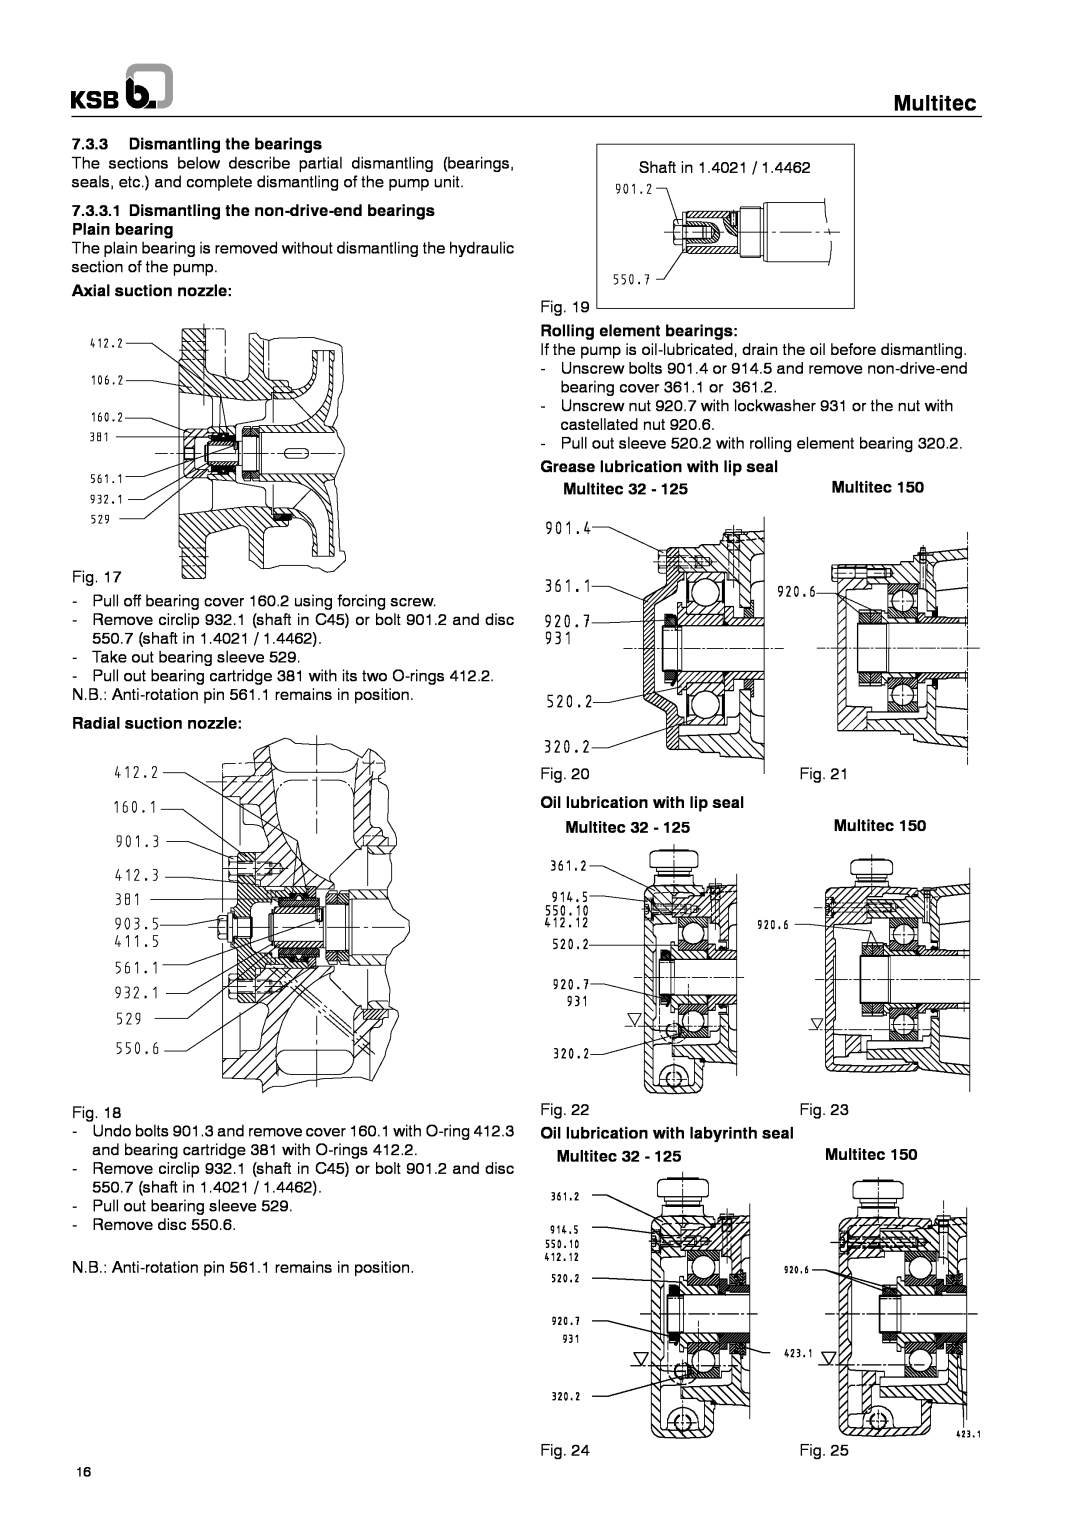 Multitech 1777.8/7-10 G3 operating instructions Multitec, 7.3.3Dismantling the bearings 